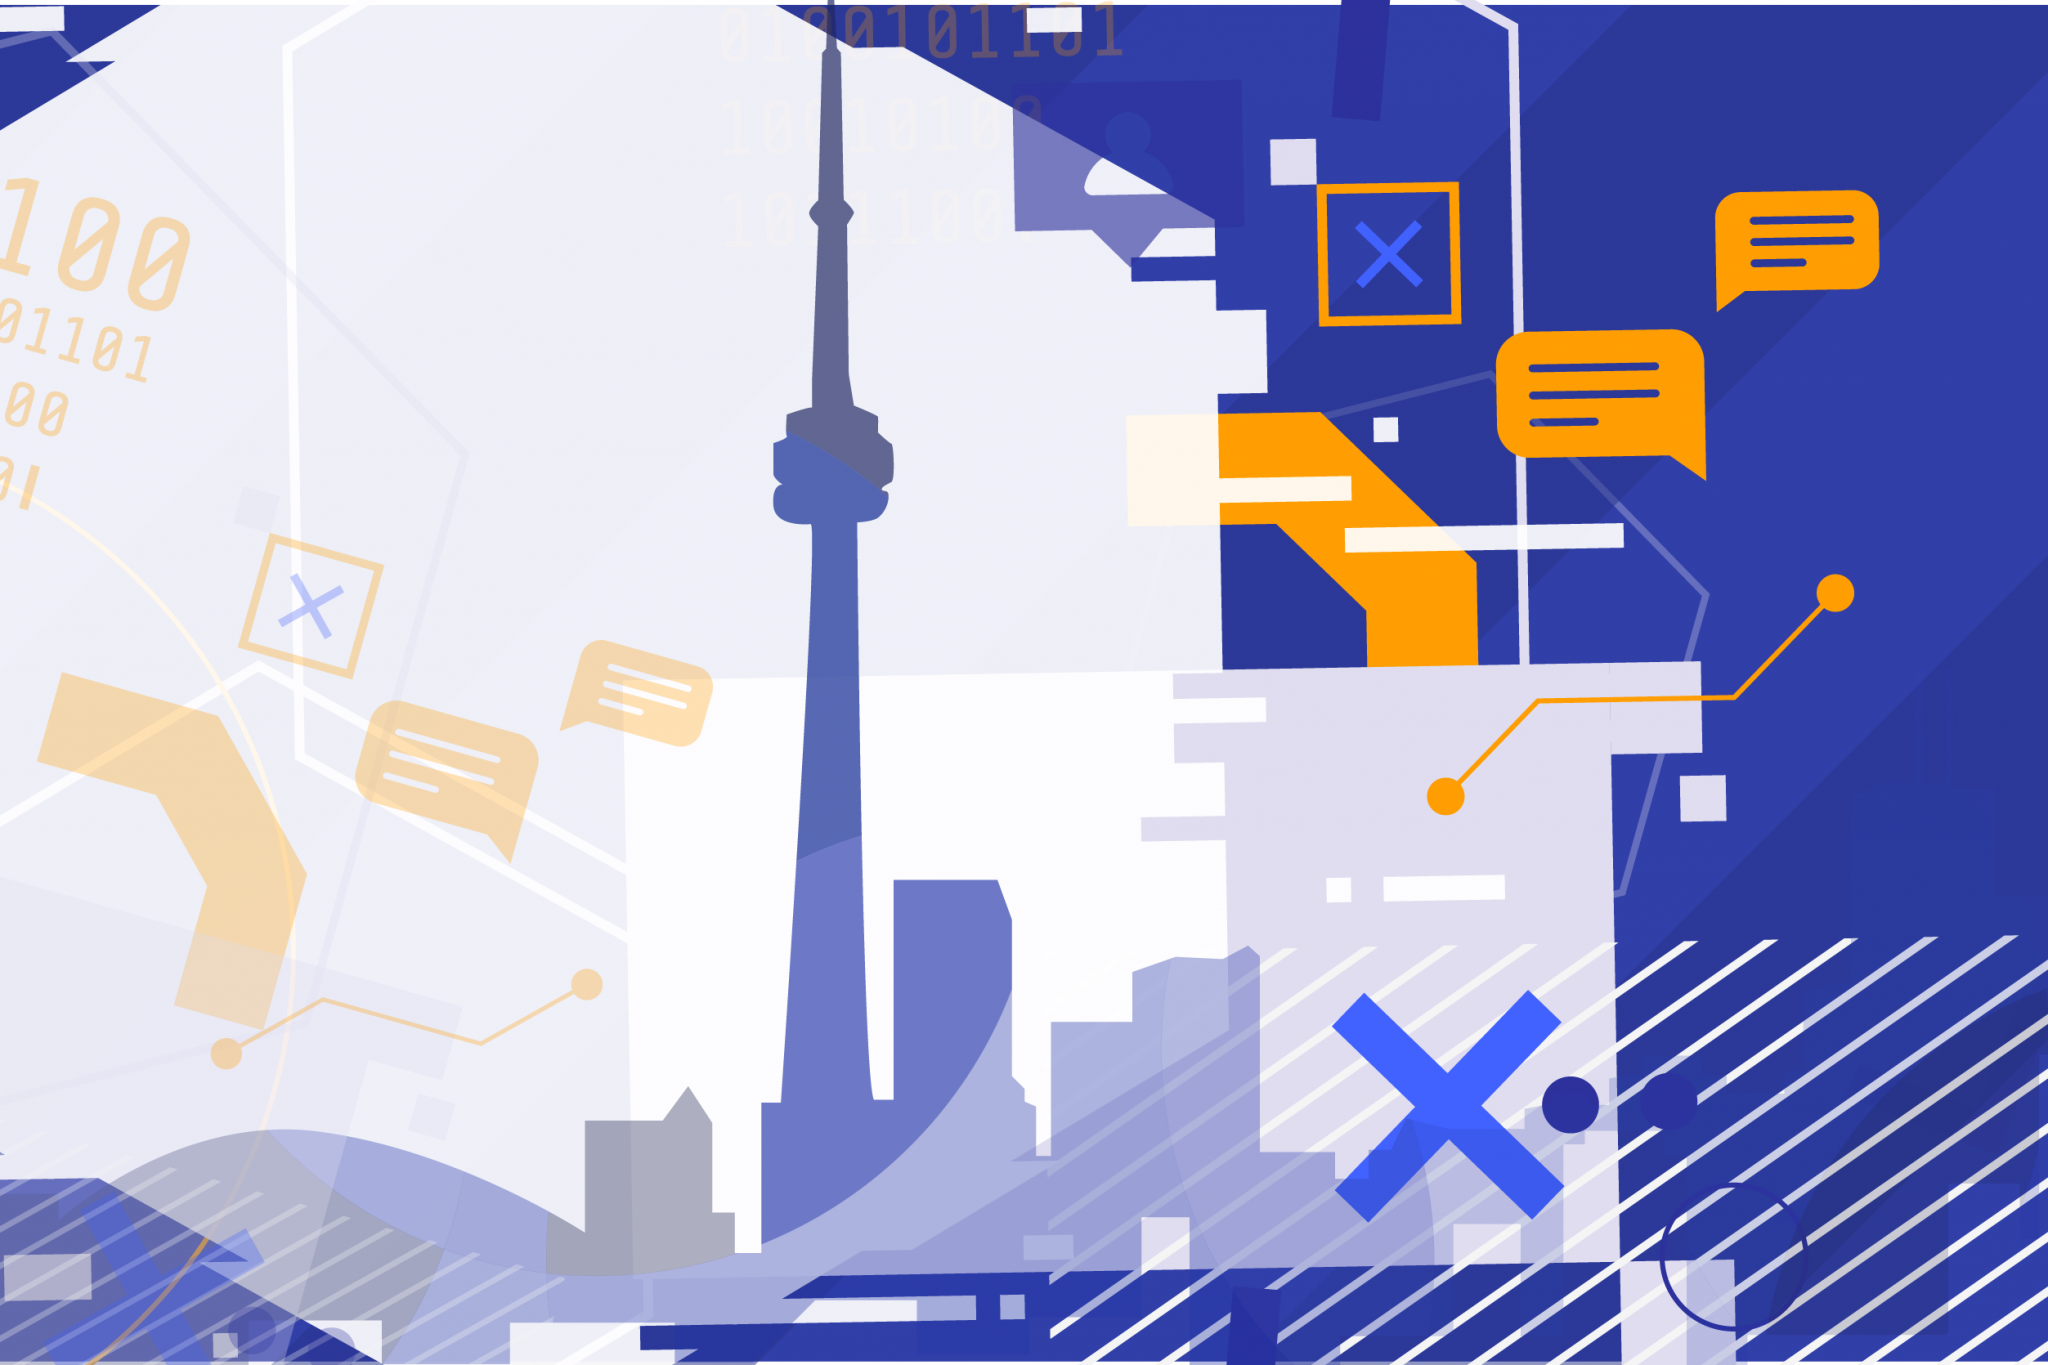 Stylised combination of the CN tower and data icons in purple and orange